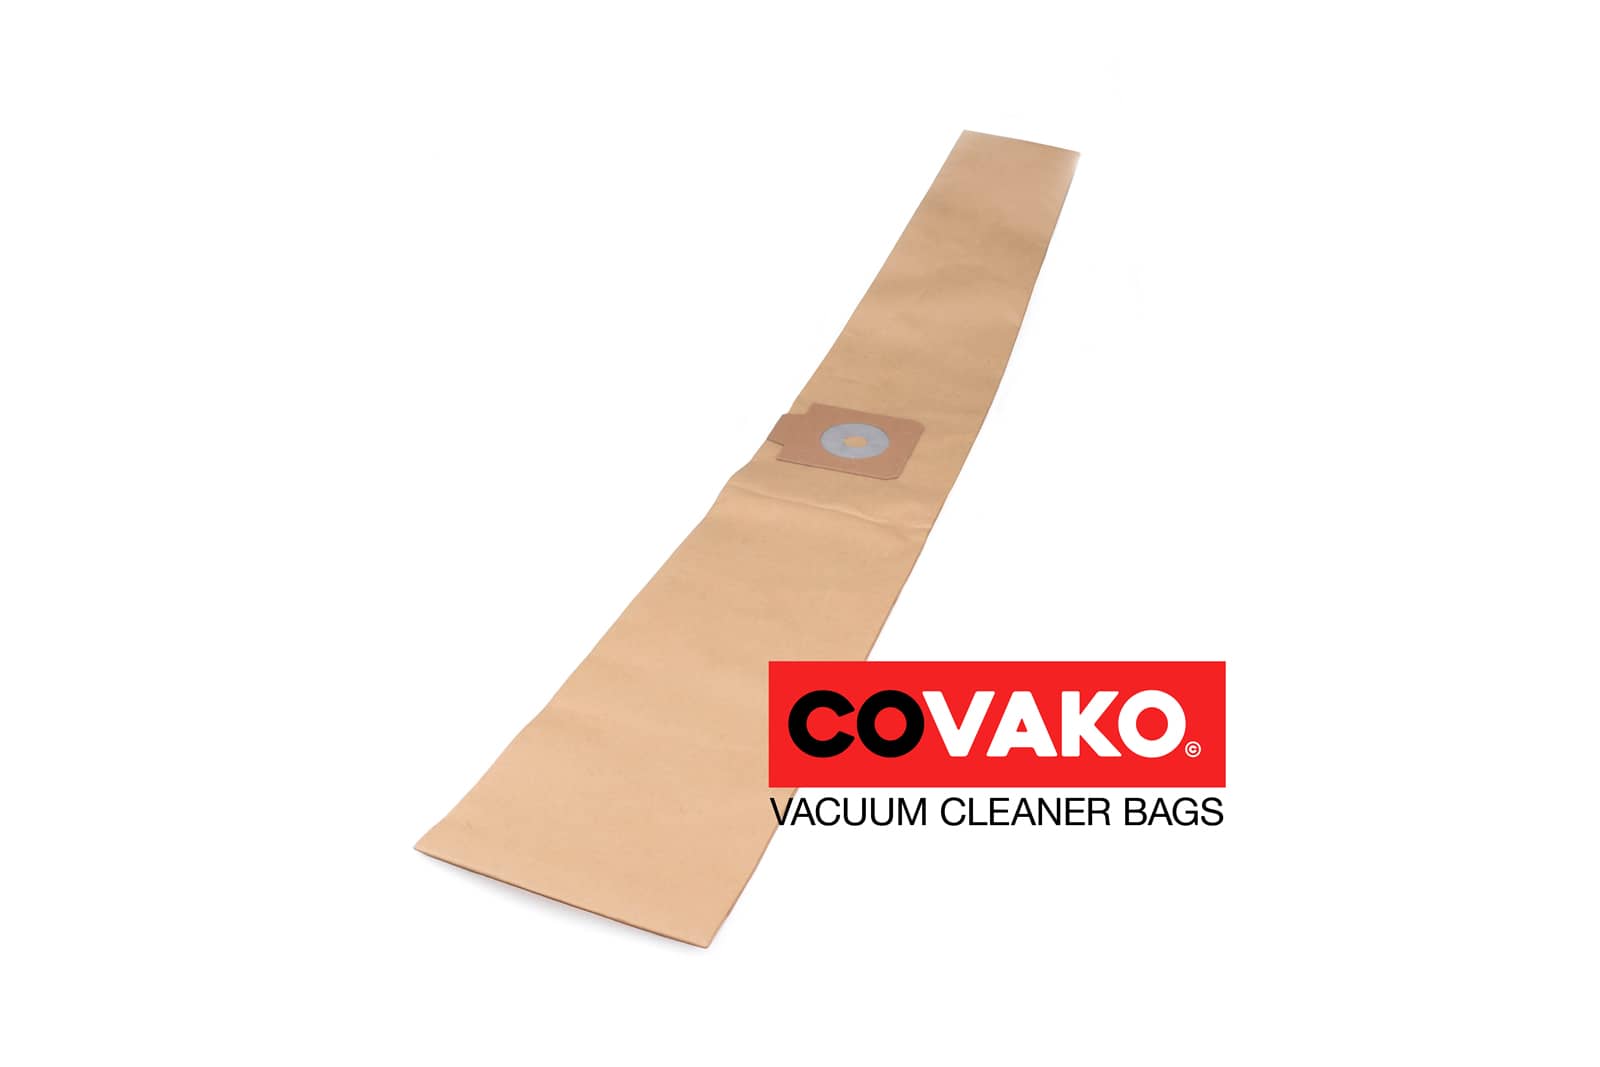 Fast GS 20 / Paper - Fast vacuum cleaner bags